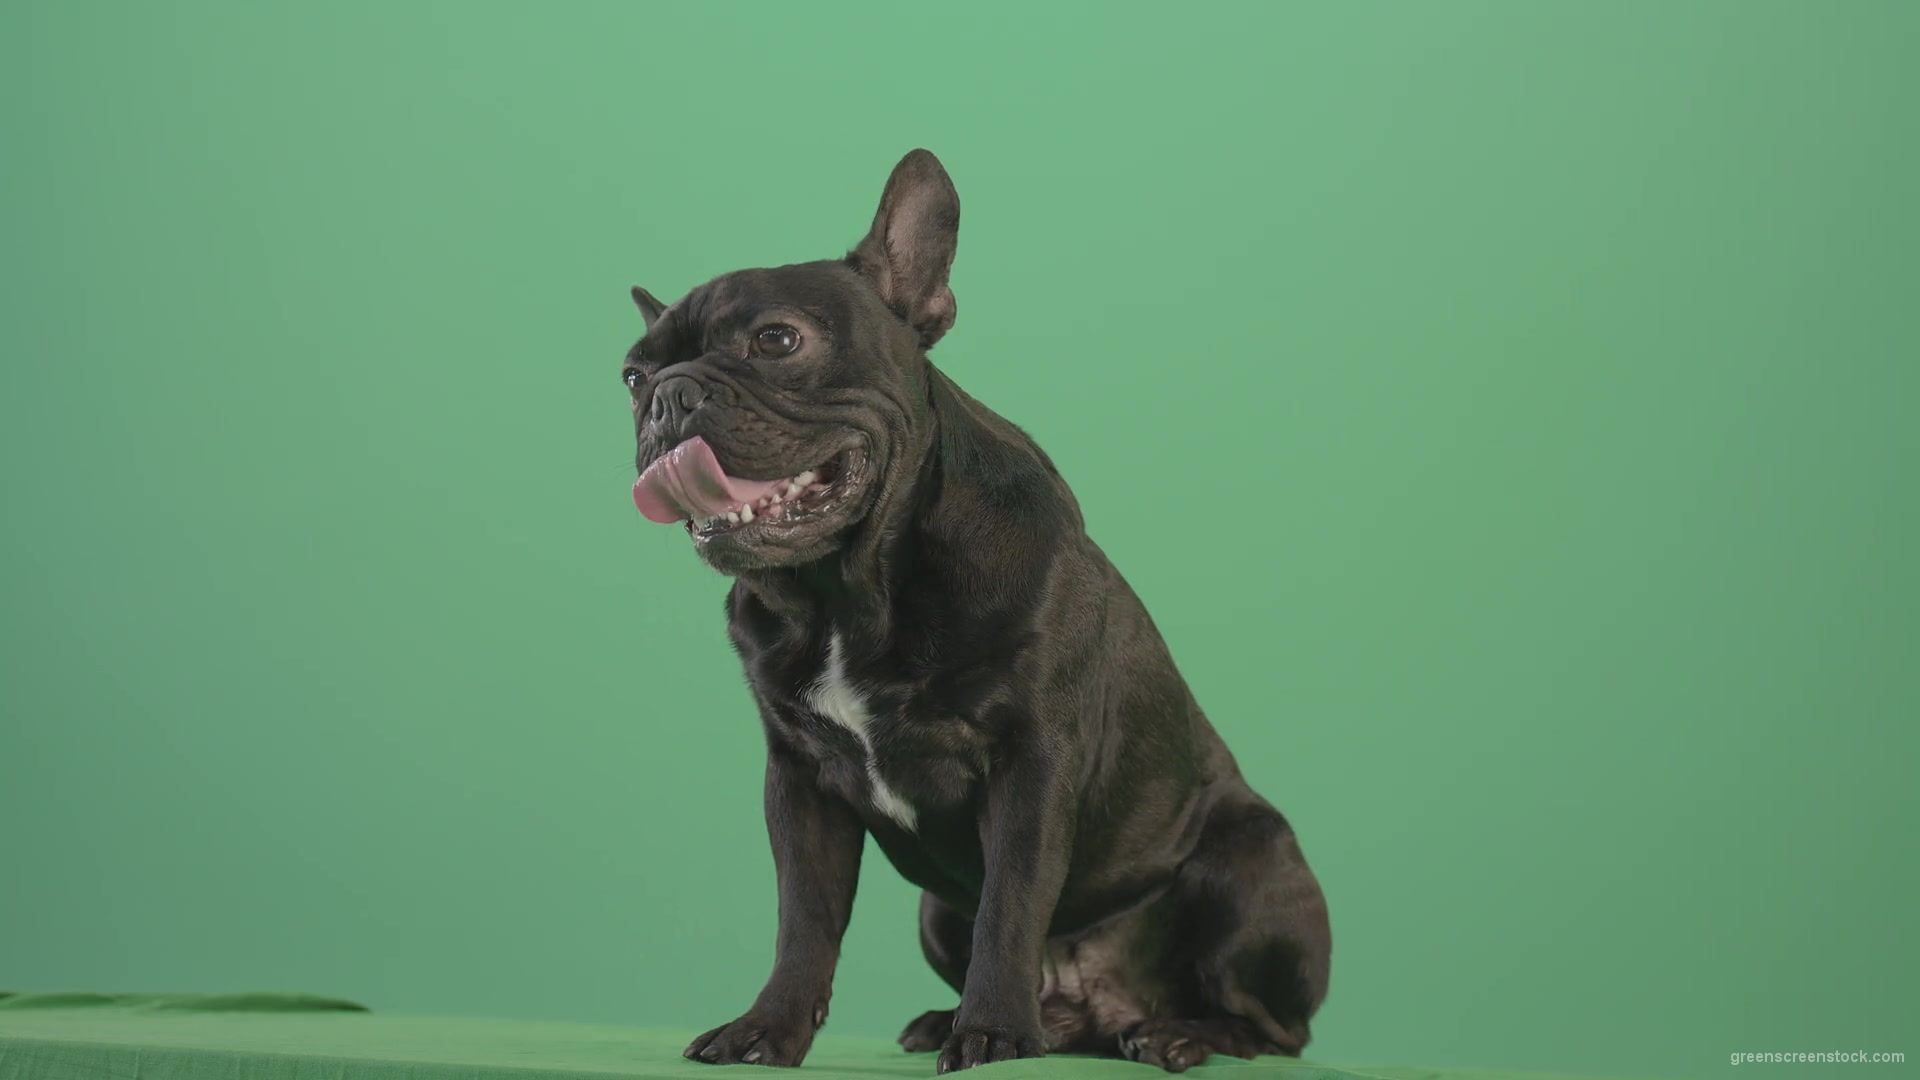 Angra-French-bulldog-black-toy-dog-watch-enemy-over-green-screen-4K-Video-Footage-1920_005 Green Screen Stock